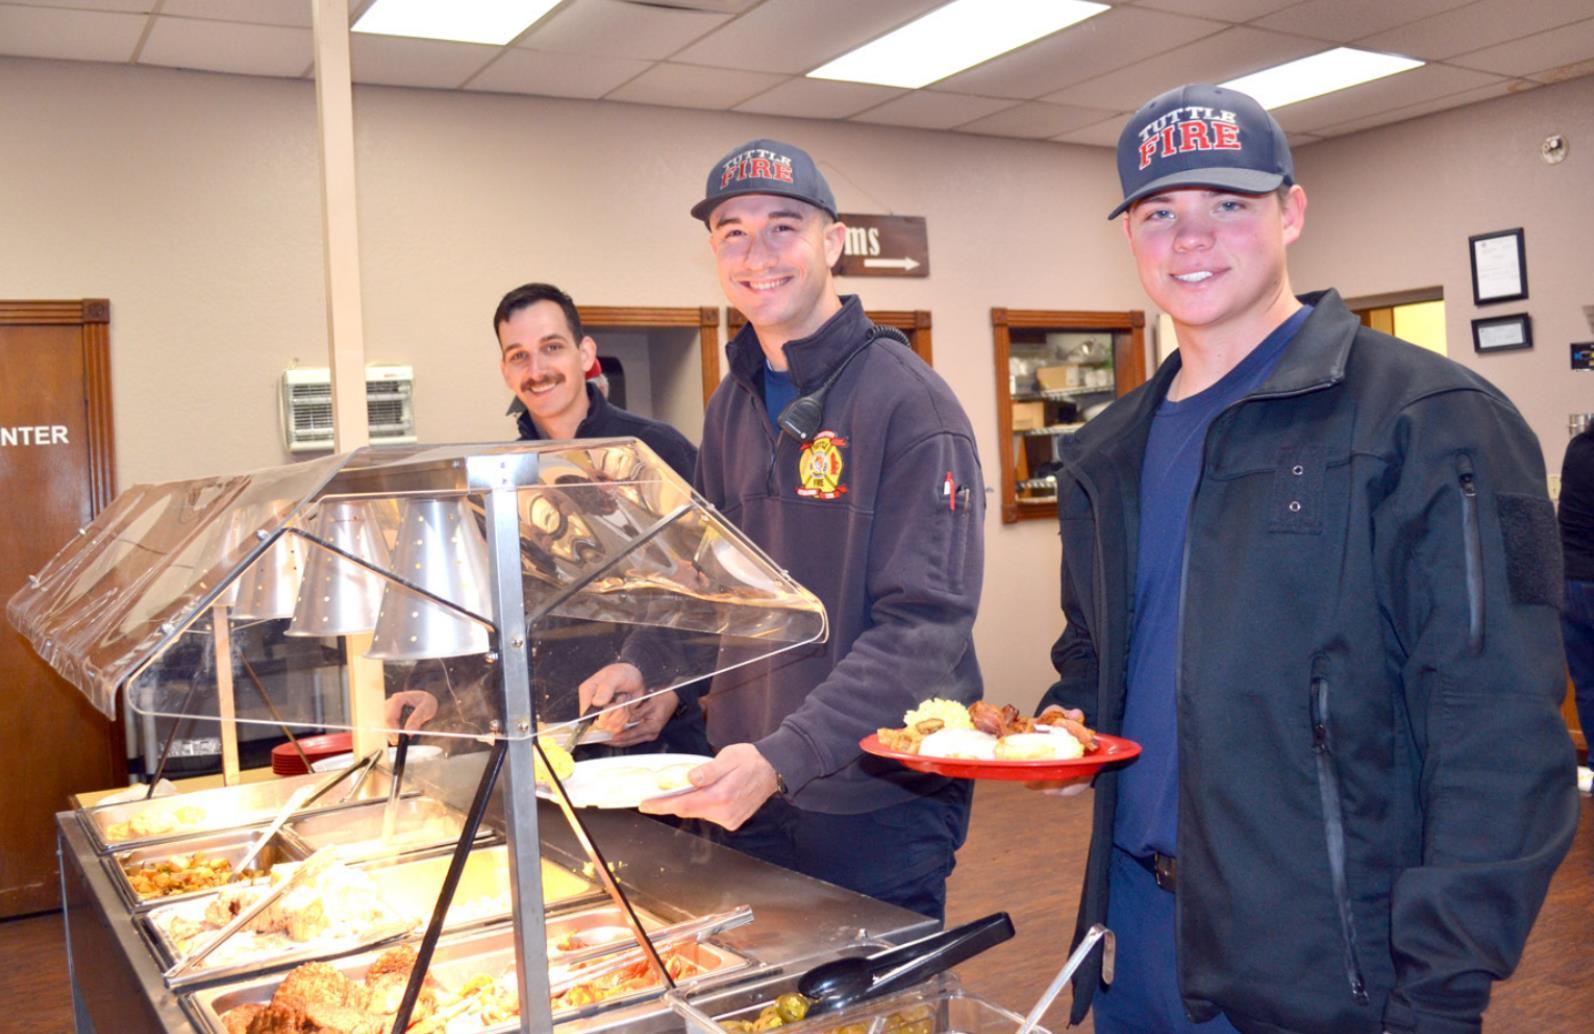 Partaking of the new Breakfast Bar offering at Brush Creek BBQ &amp;amp; Catfish are Tuttle firefighters William Sparks, Logan Fertic, and Jace Moudy. They were at the Newcastle restaurant on Friday morning. • photo by Mark Codner